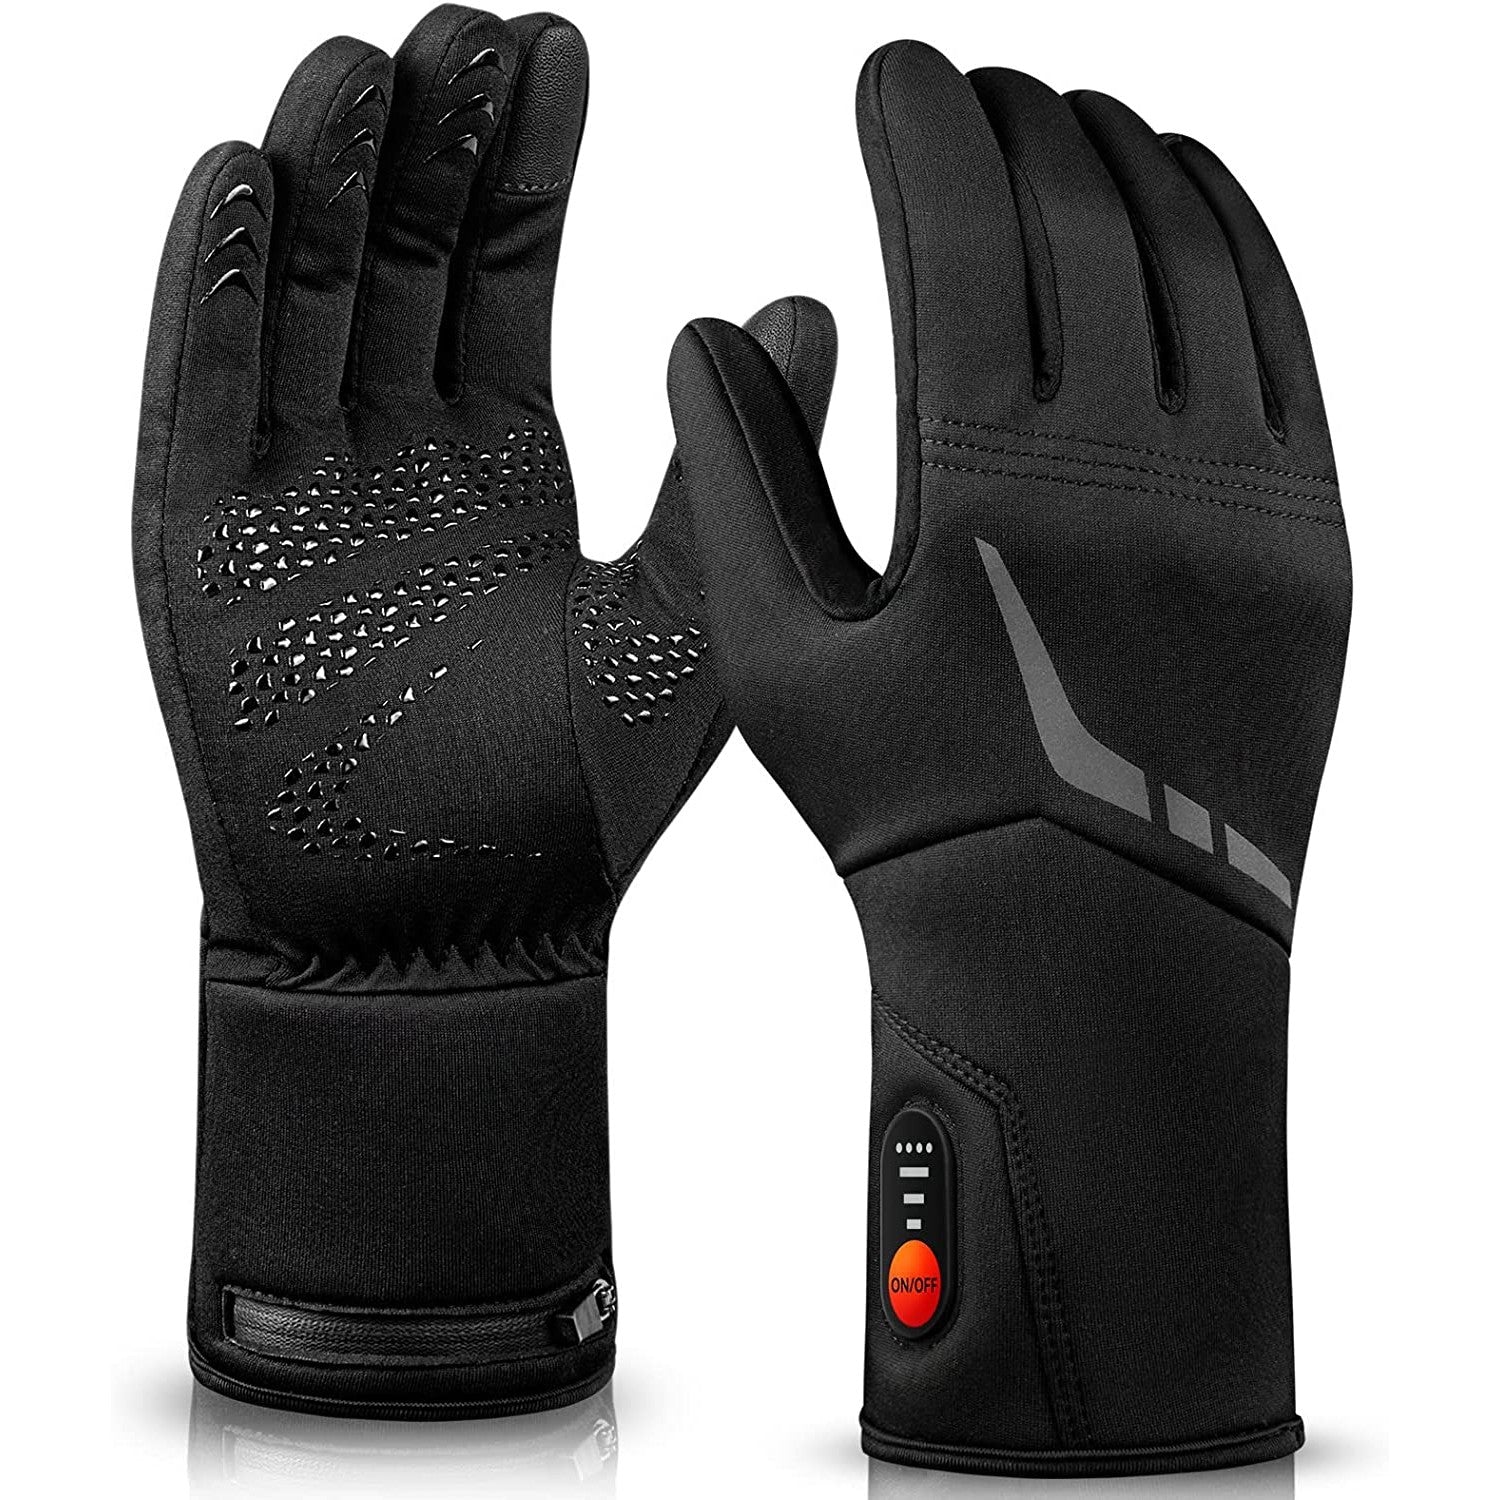 A pair of black rechargeable heated gloves.